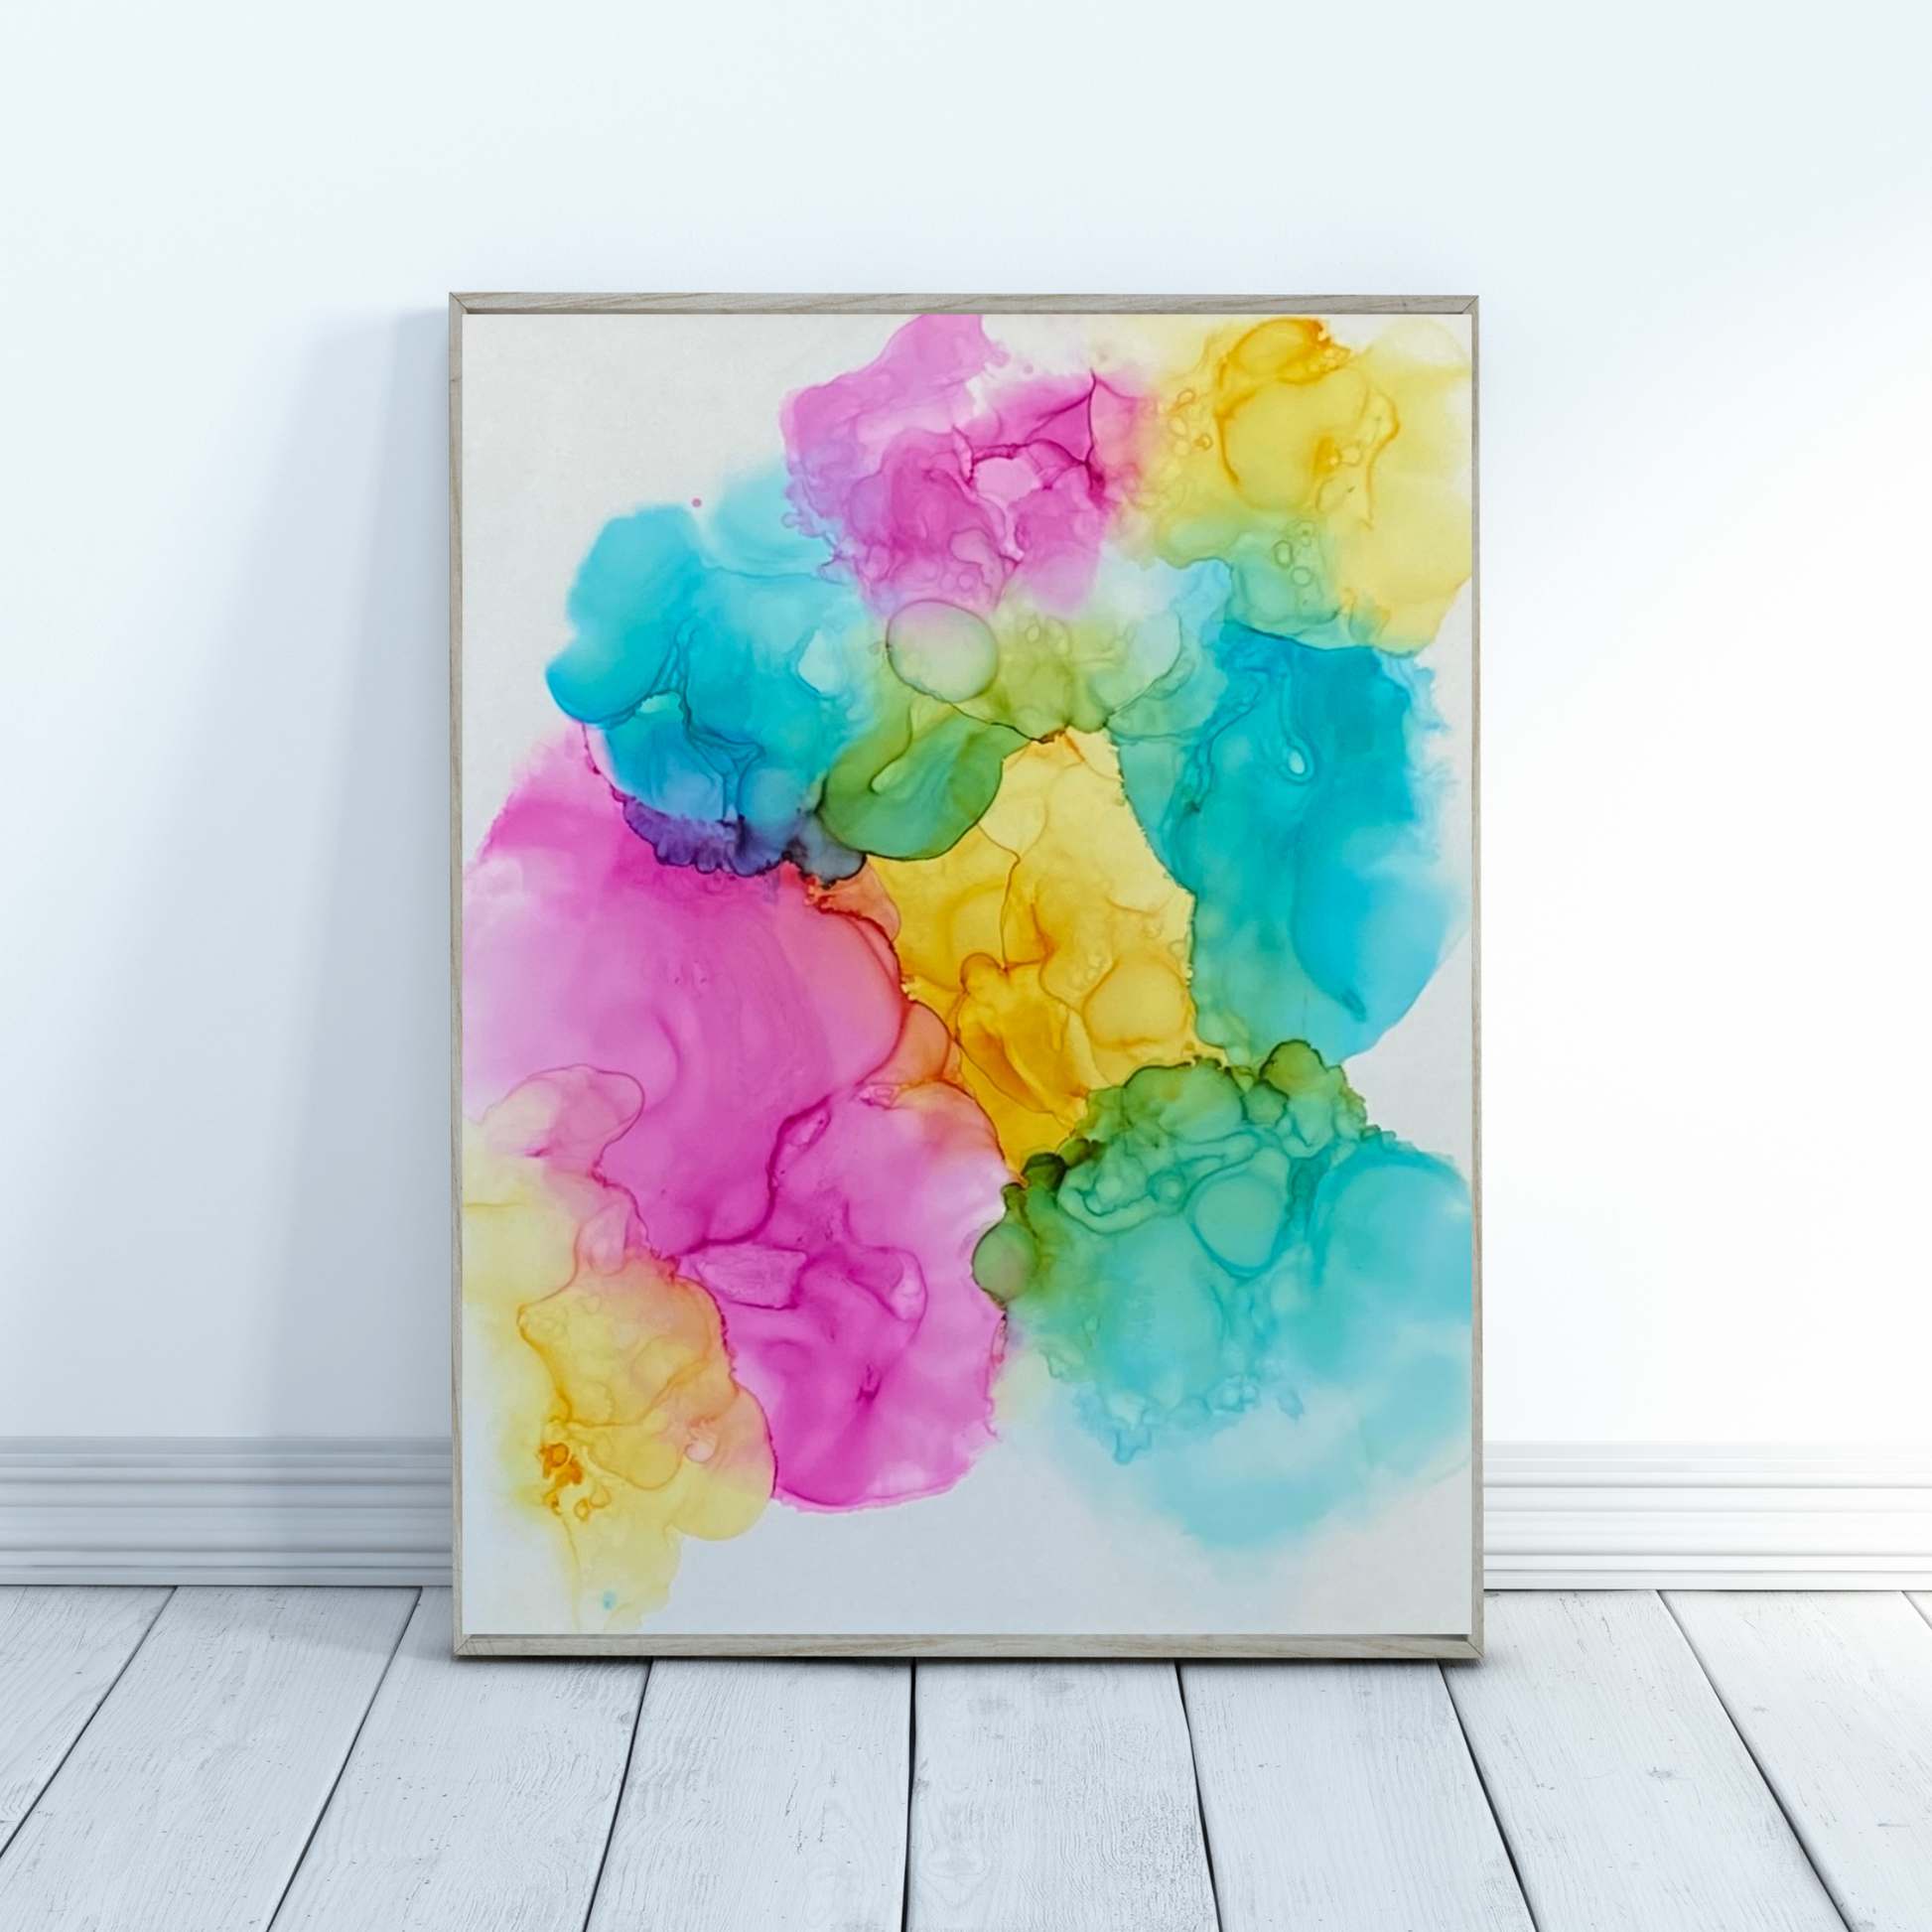 Flowing colors of pink, yellow, and blue. Abstract Alcohol Ink that evokes feeling and meaning